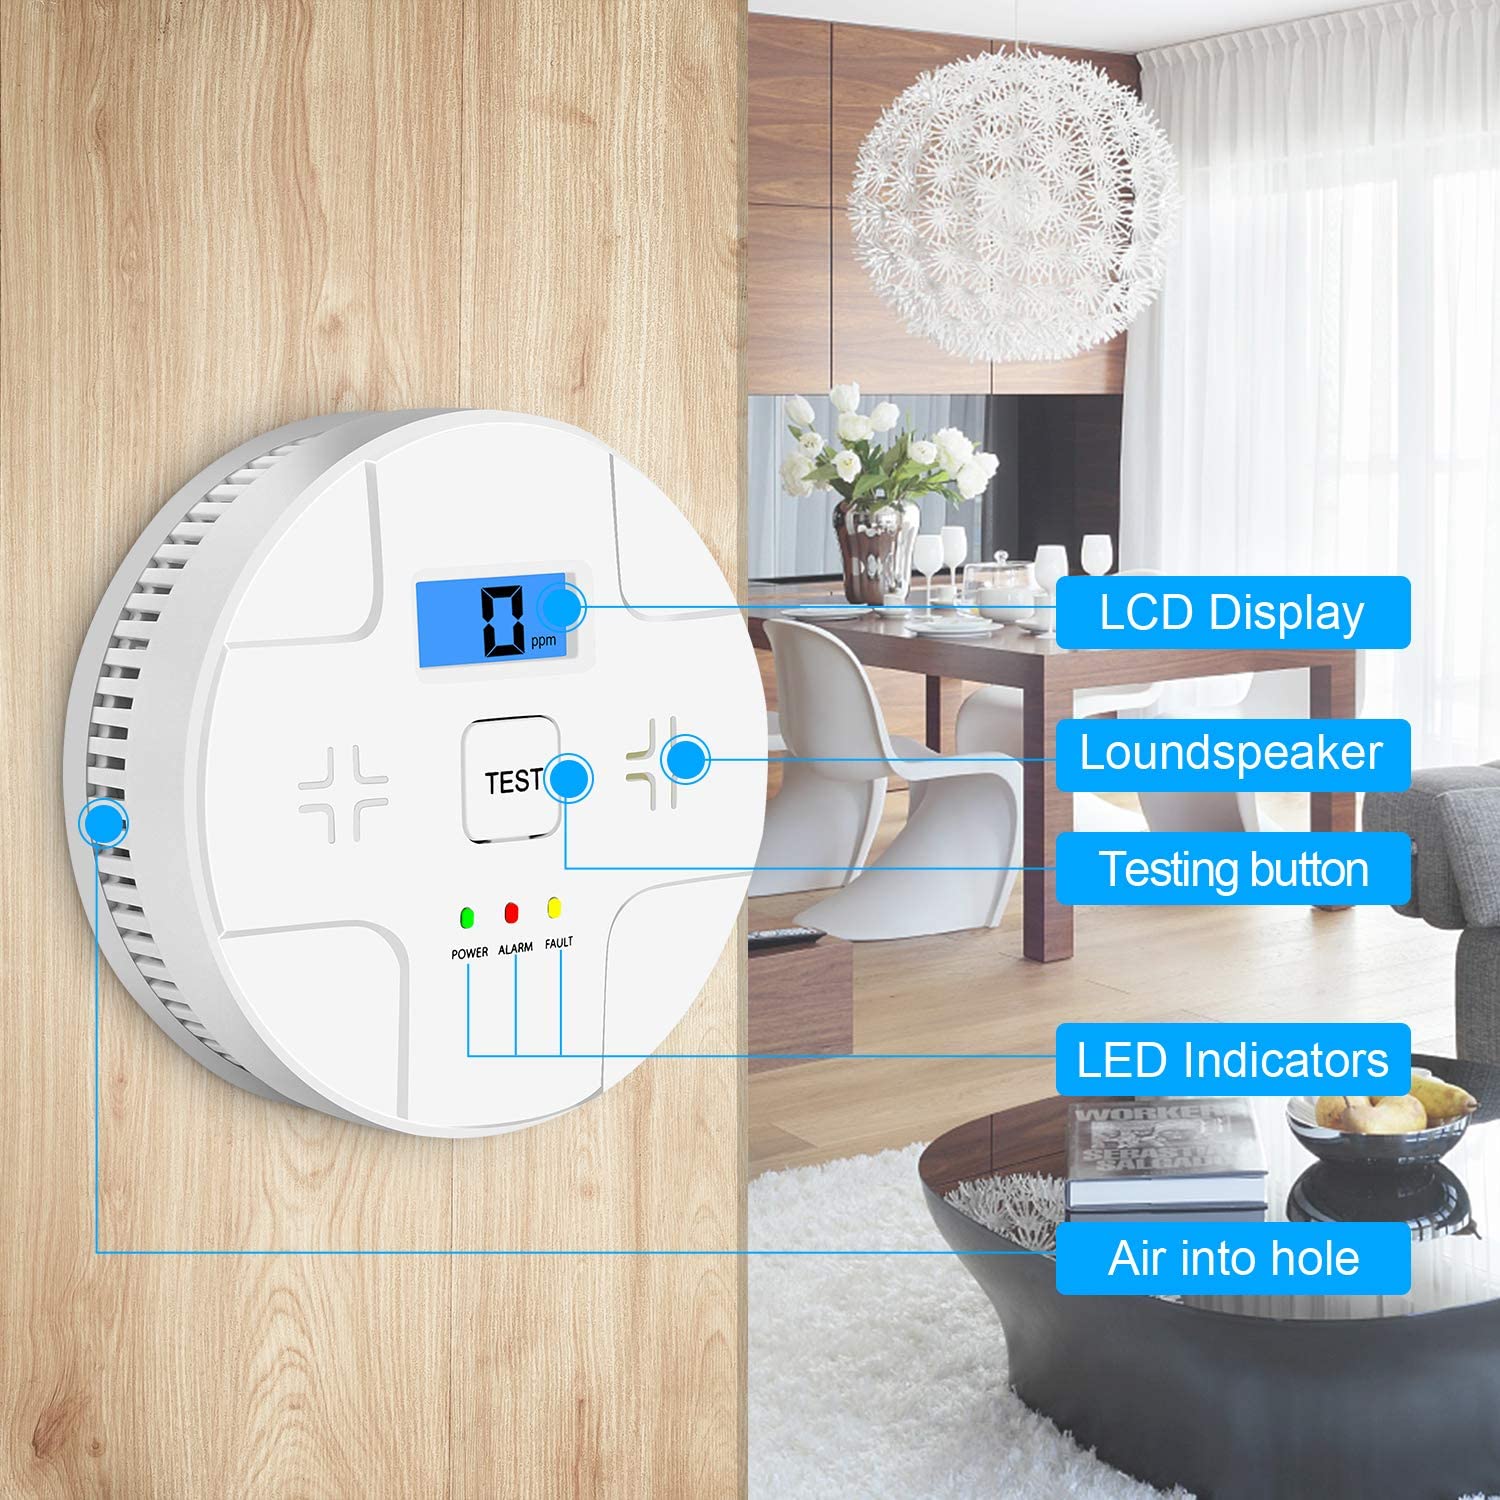 Combination Smoke Carbon Monoxide Alarm Detector Powered by Battery,Dual Alarm Sensor of Smoke and CO,Easy to Install